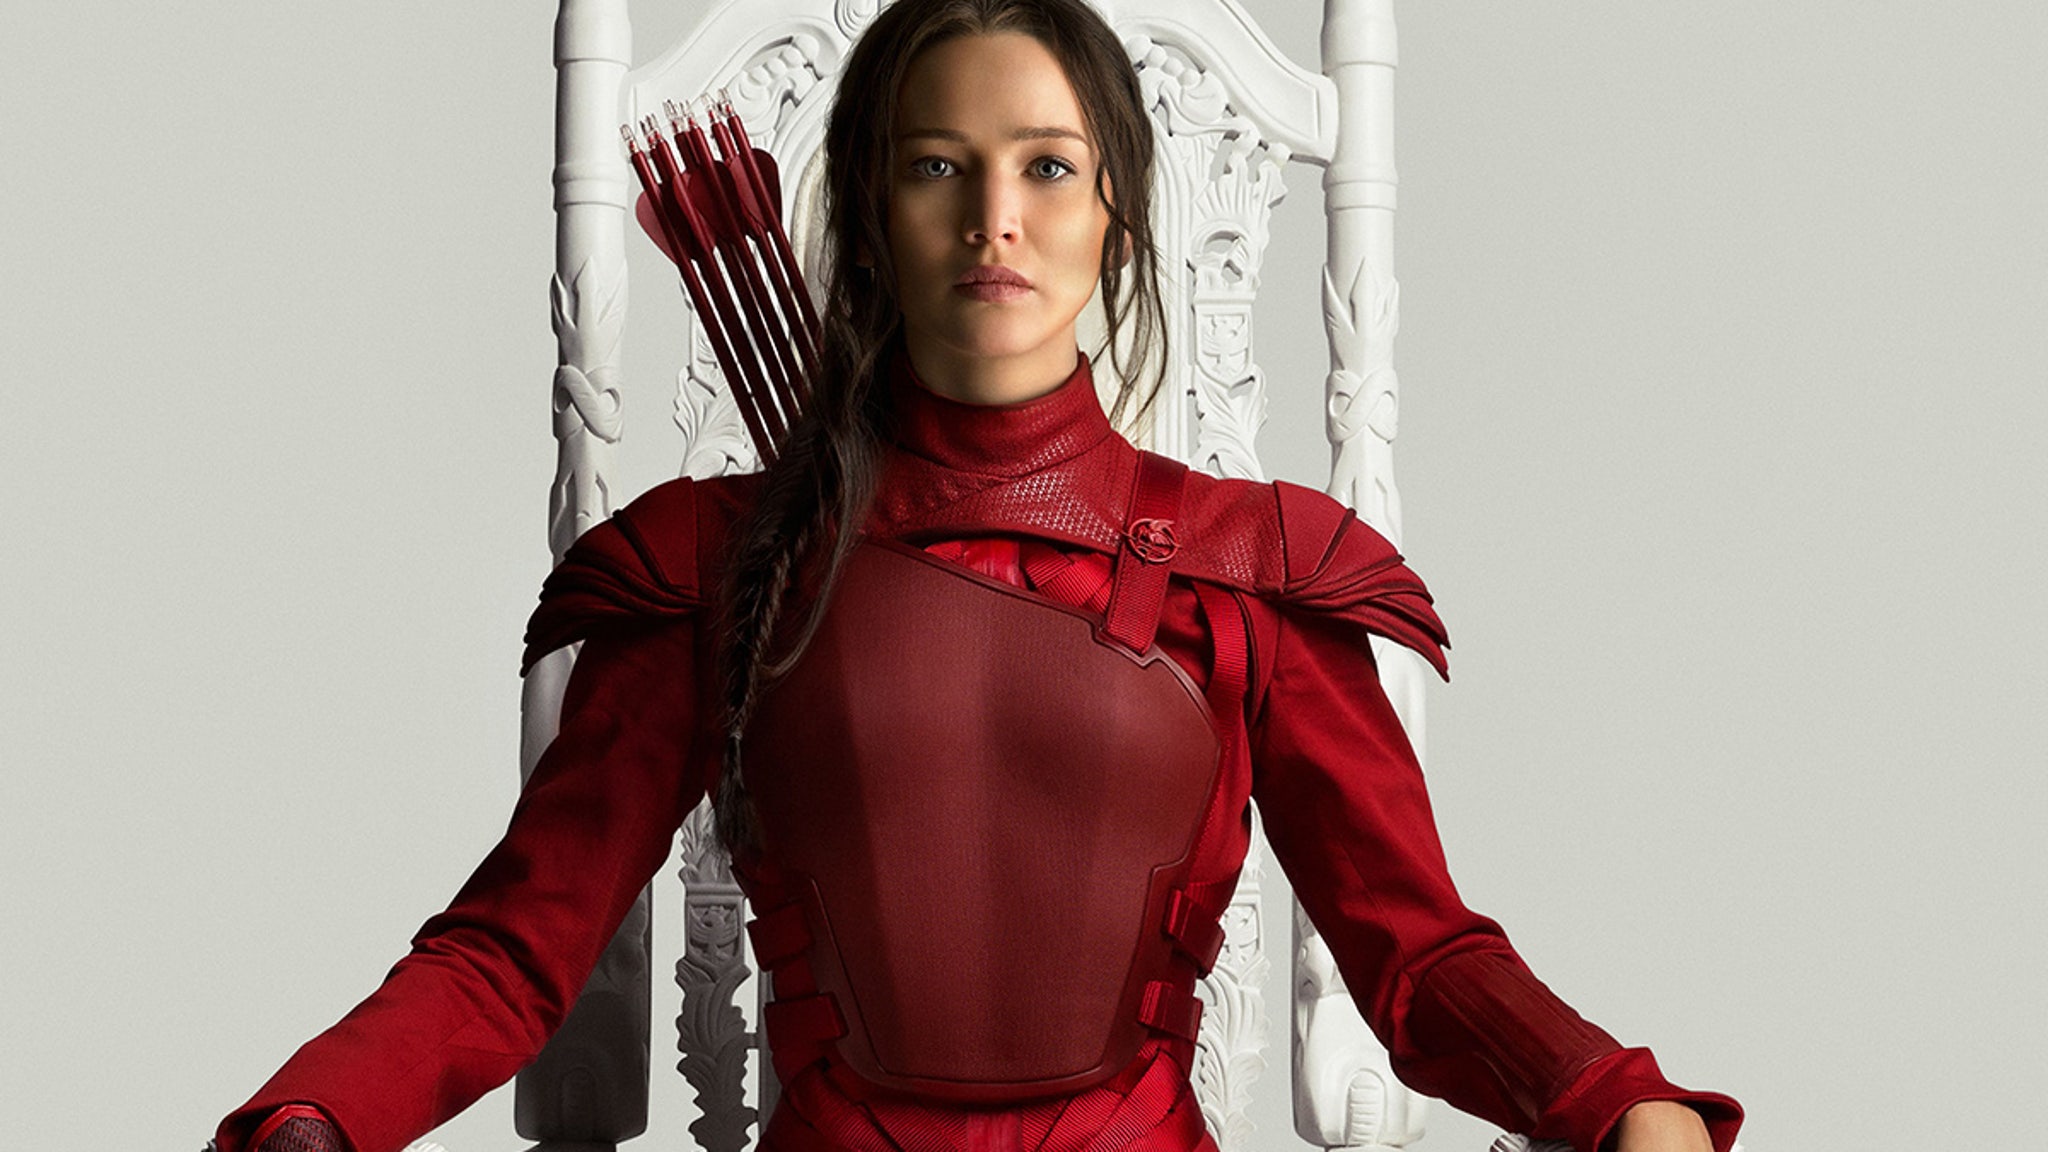 The Hunger Games Mockingjay Part 2 Trailer Highlights Booby Traps